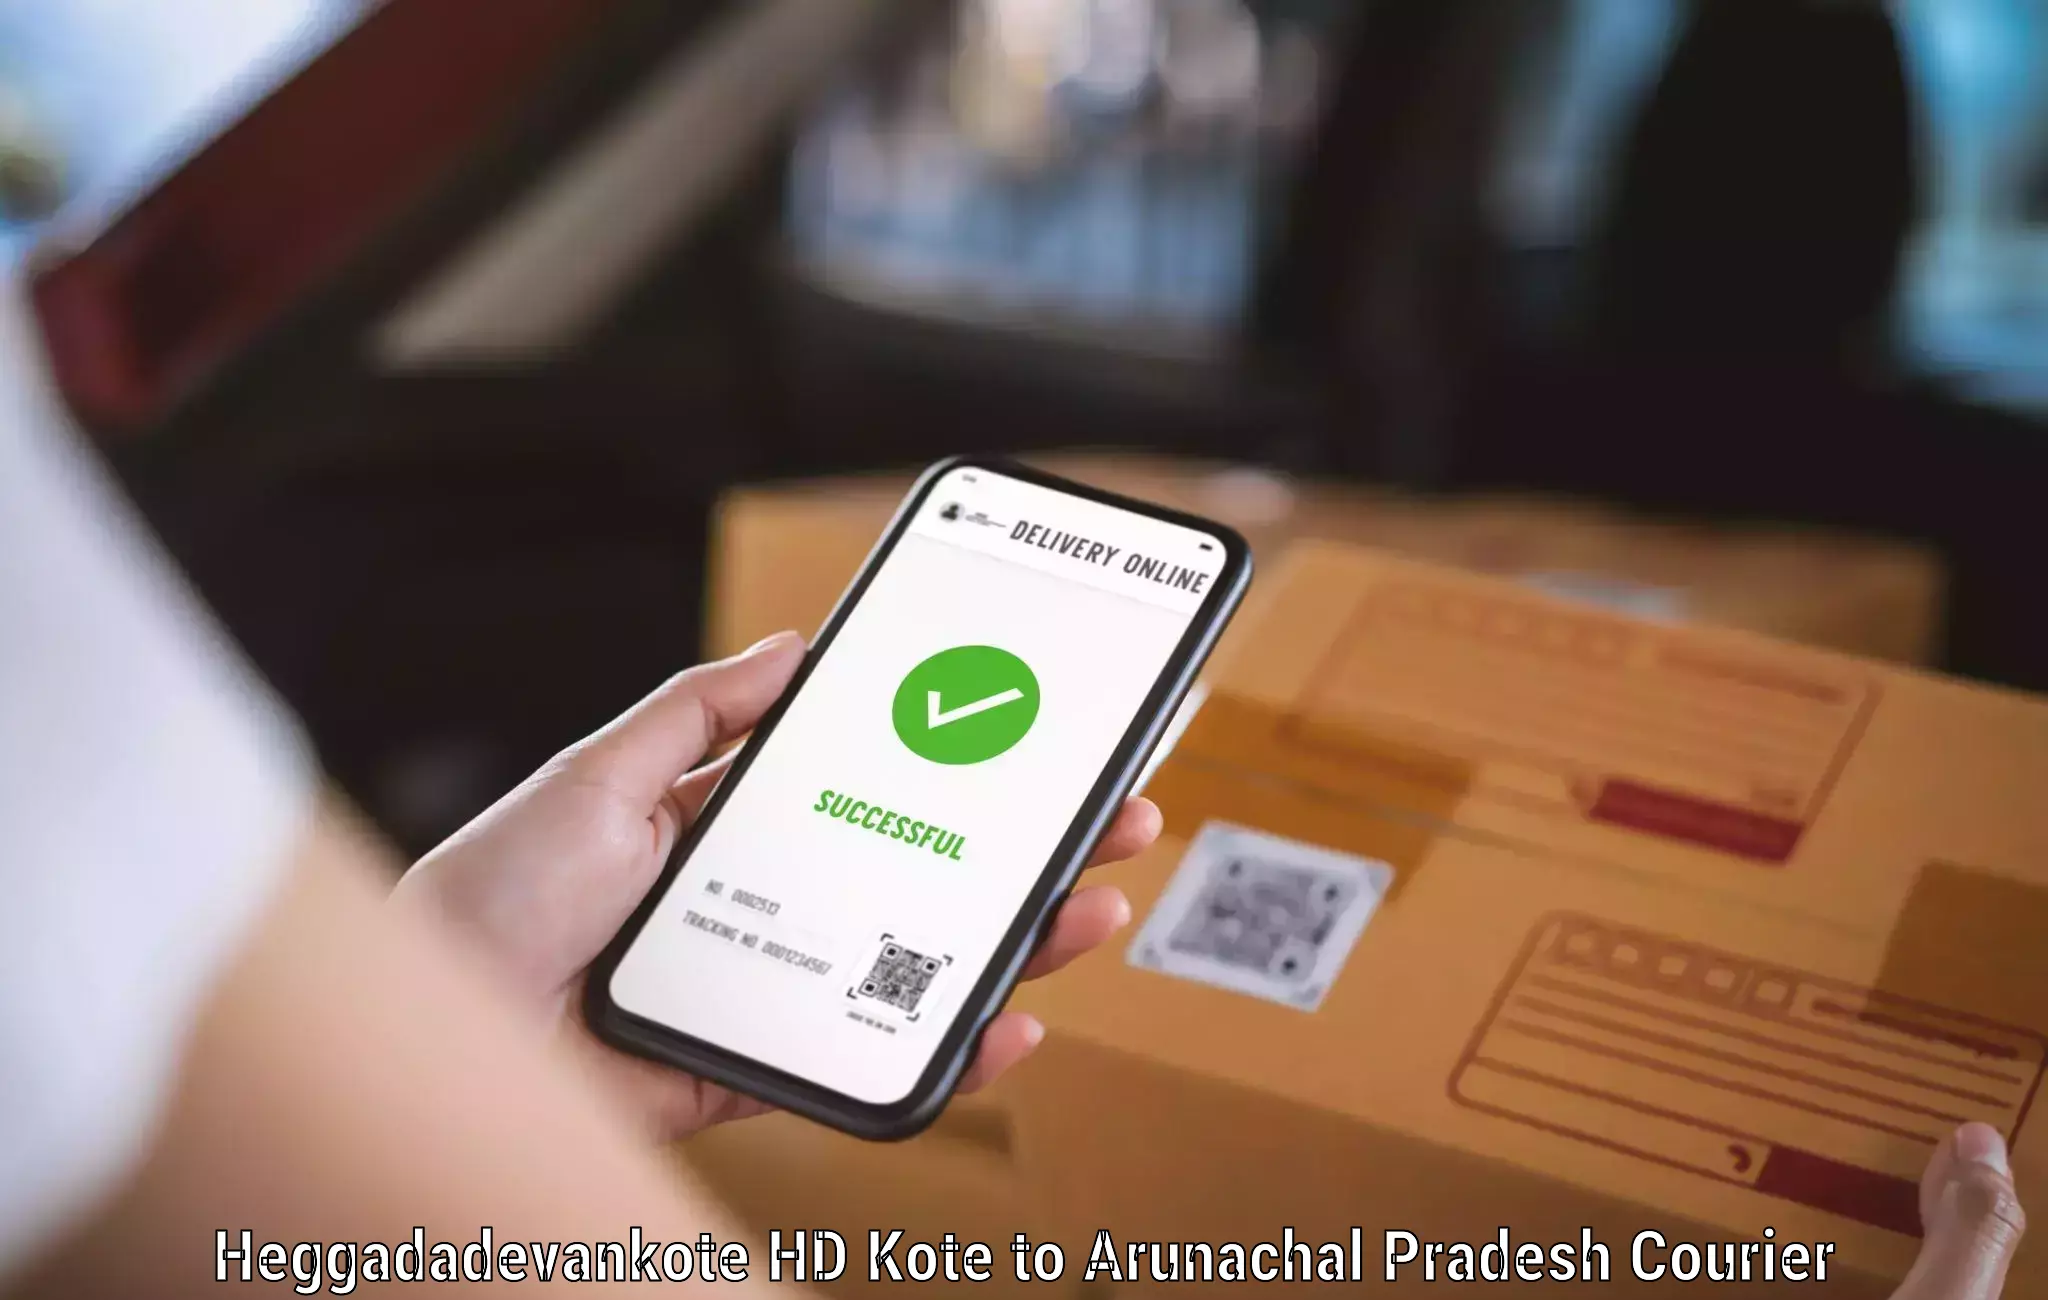 Subscription-based courier Heggadadevankote HD Kote to Aalo